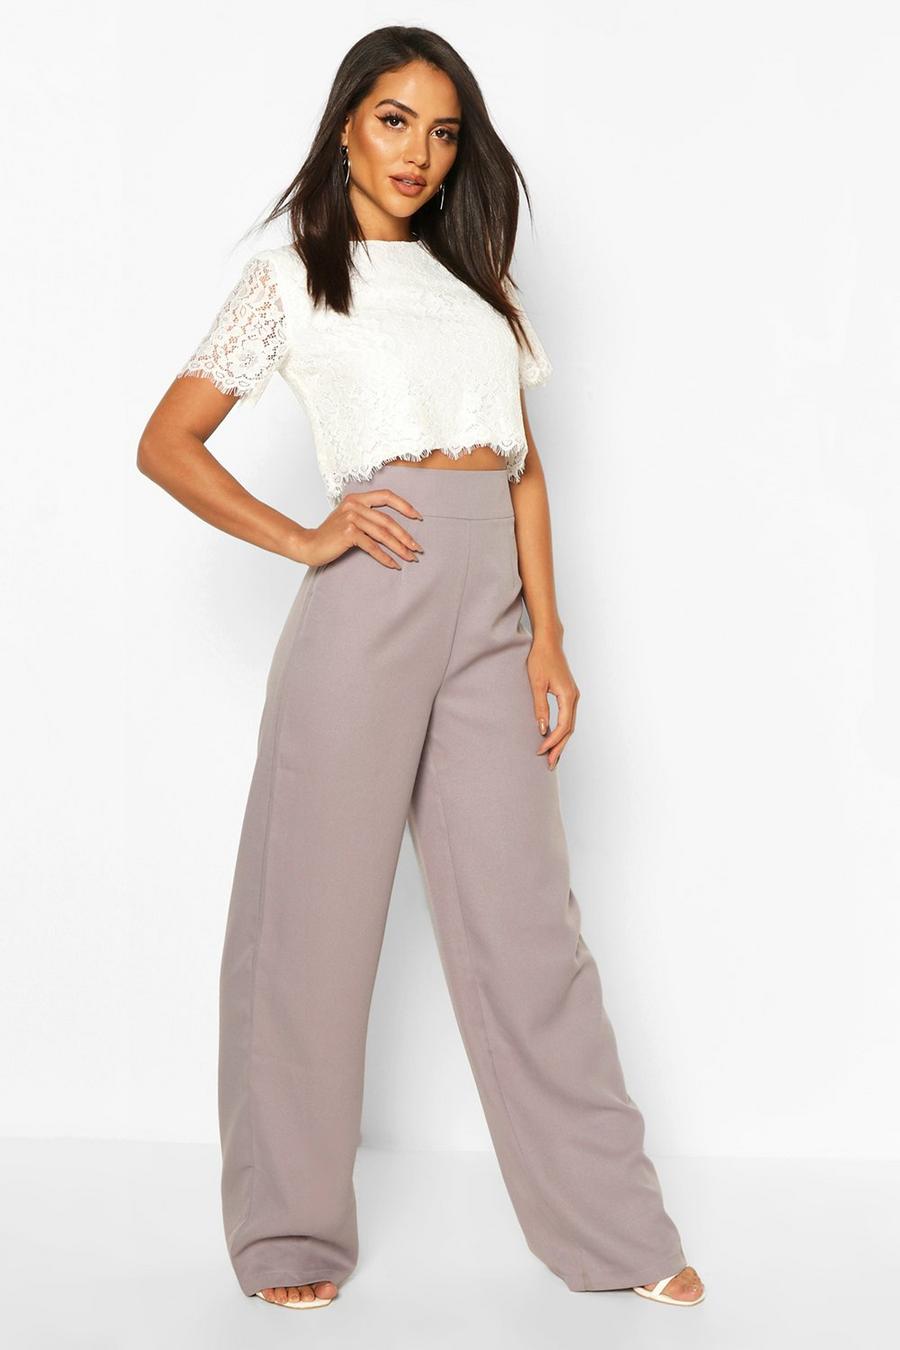 Grey Woven Lace Top And Pants Two-Piece Set